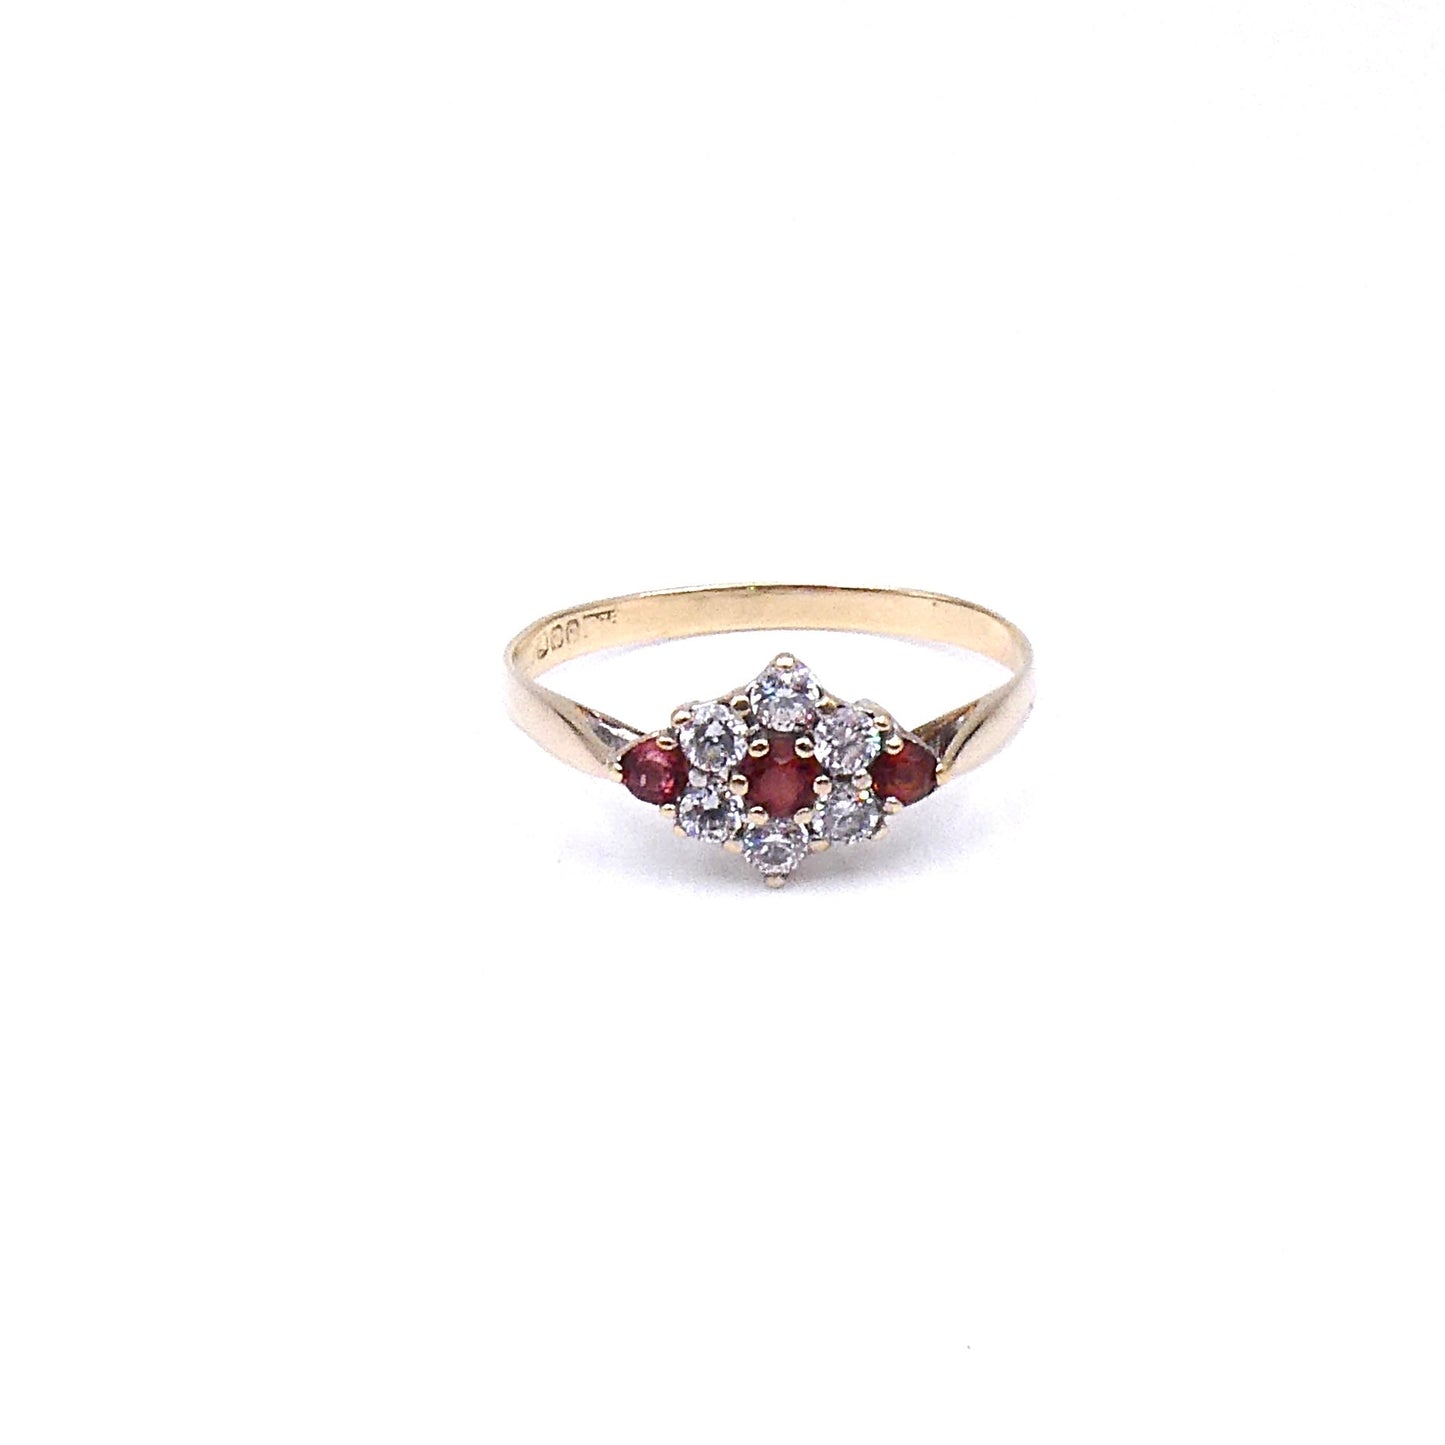 Garnet flower ring 9kt gold and crystals. - Collected